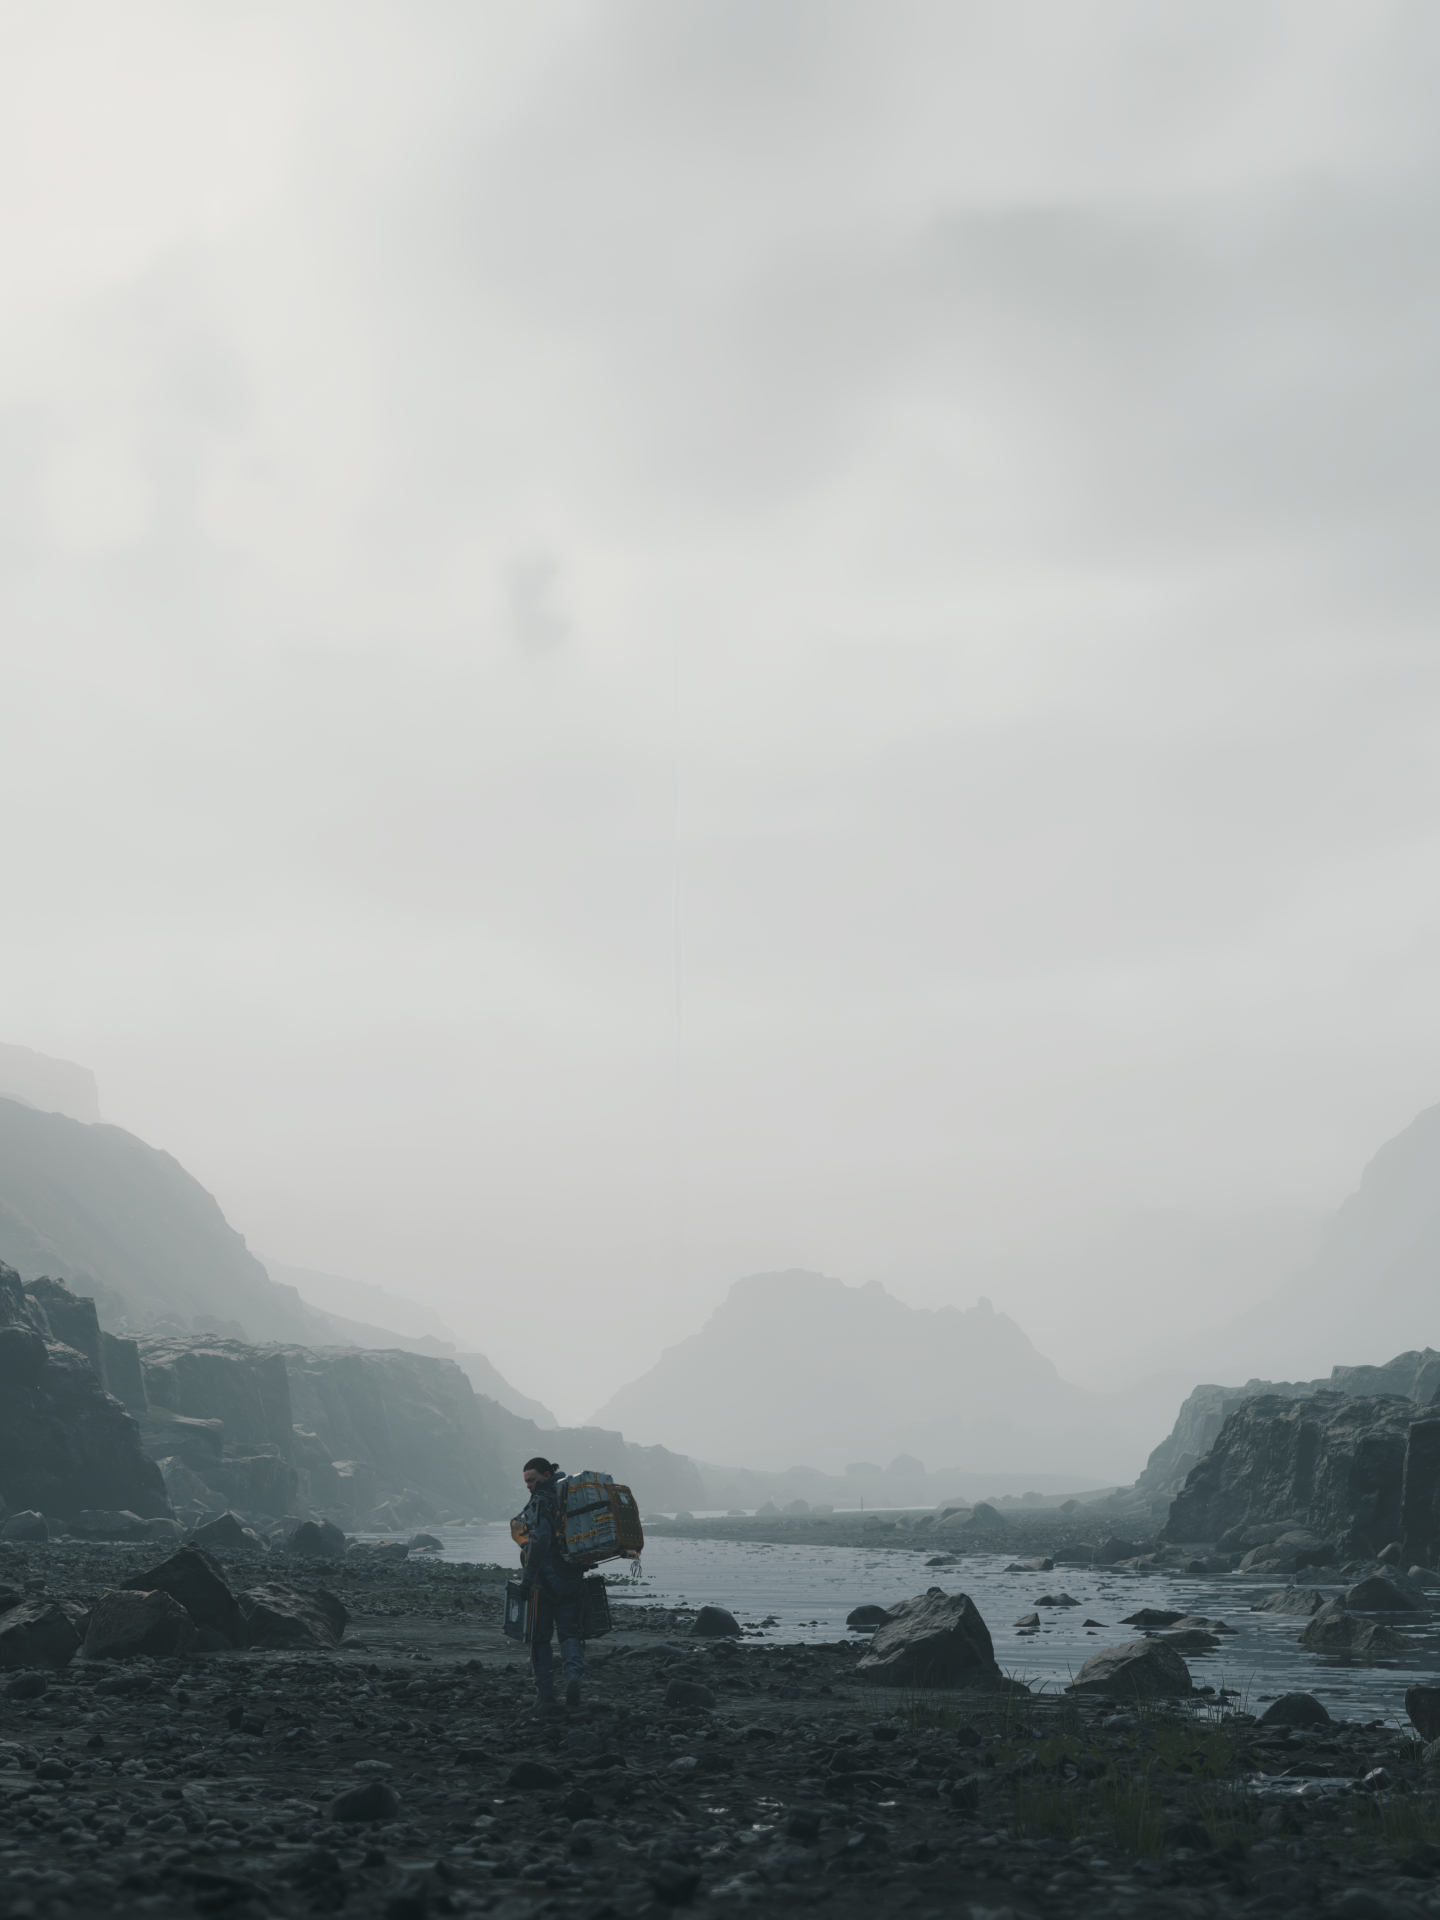 Hideo Kojima's Most Anticipated Death Stranding Game Unexpectedly Comes to  PC in Summer 2020 - 29.10.2019, Sputnik International